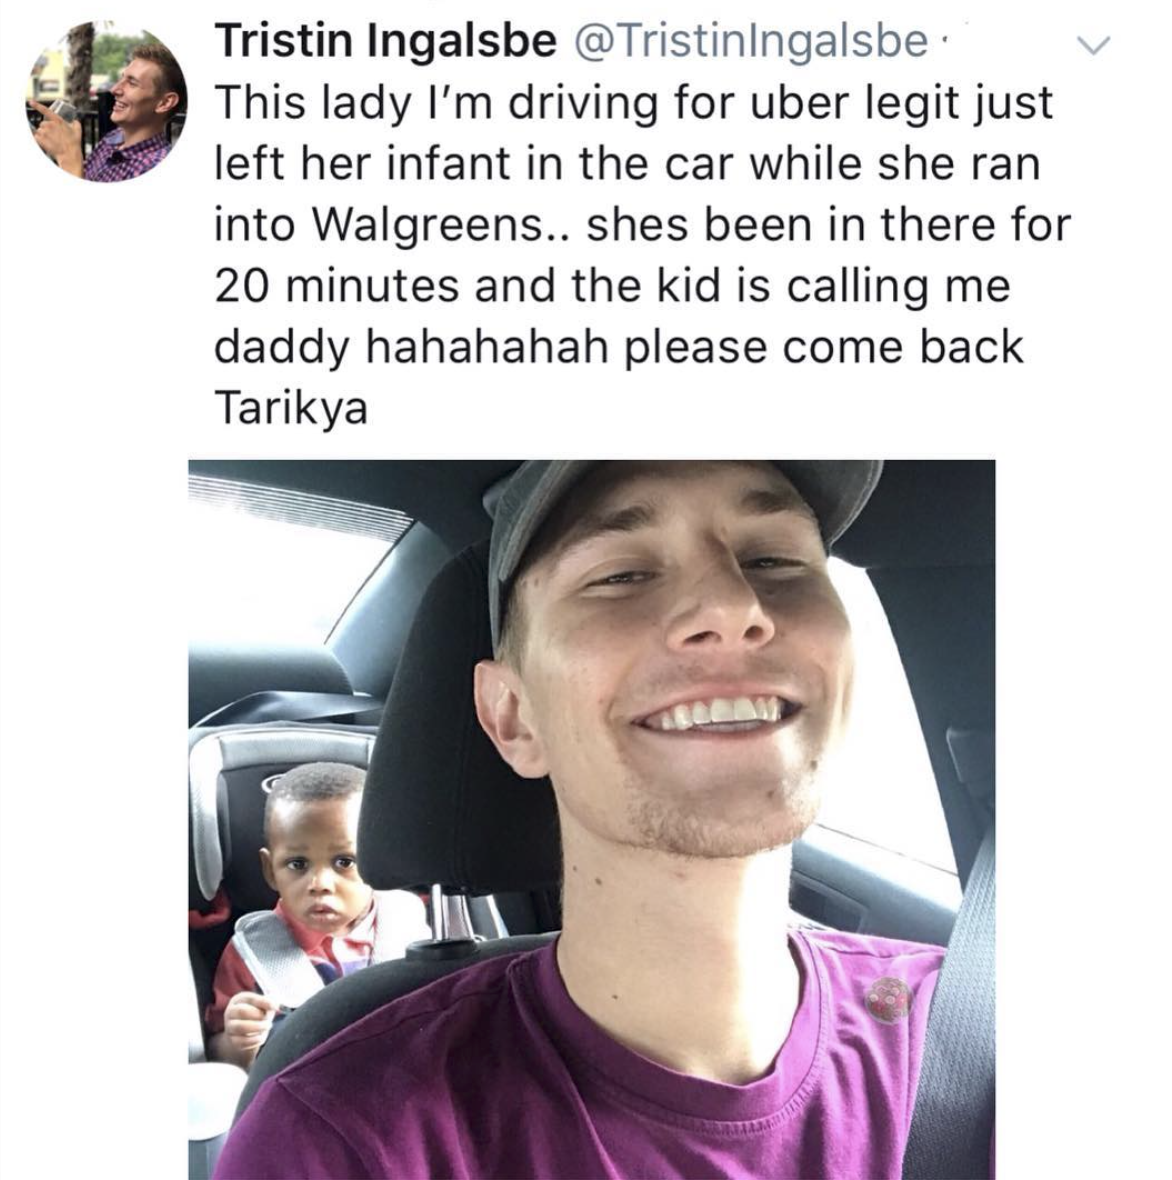 uber memes funny - Tristin Ingalsbe @ Tristinlngalsbe This lady I'm driving for uber legit just left her infant in the car while she ran into Walgreens.. shes been in there for 20 minutes and the kid is calling me daddy hahahahah please come back Tarikya